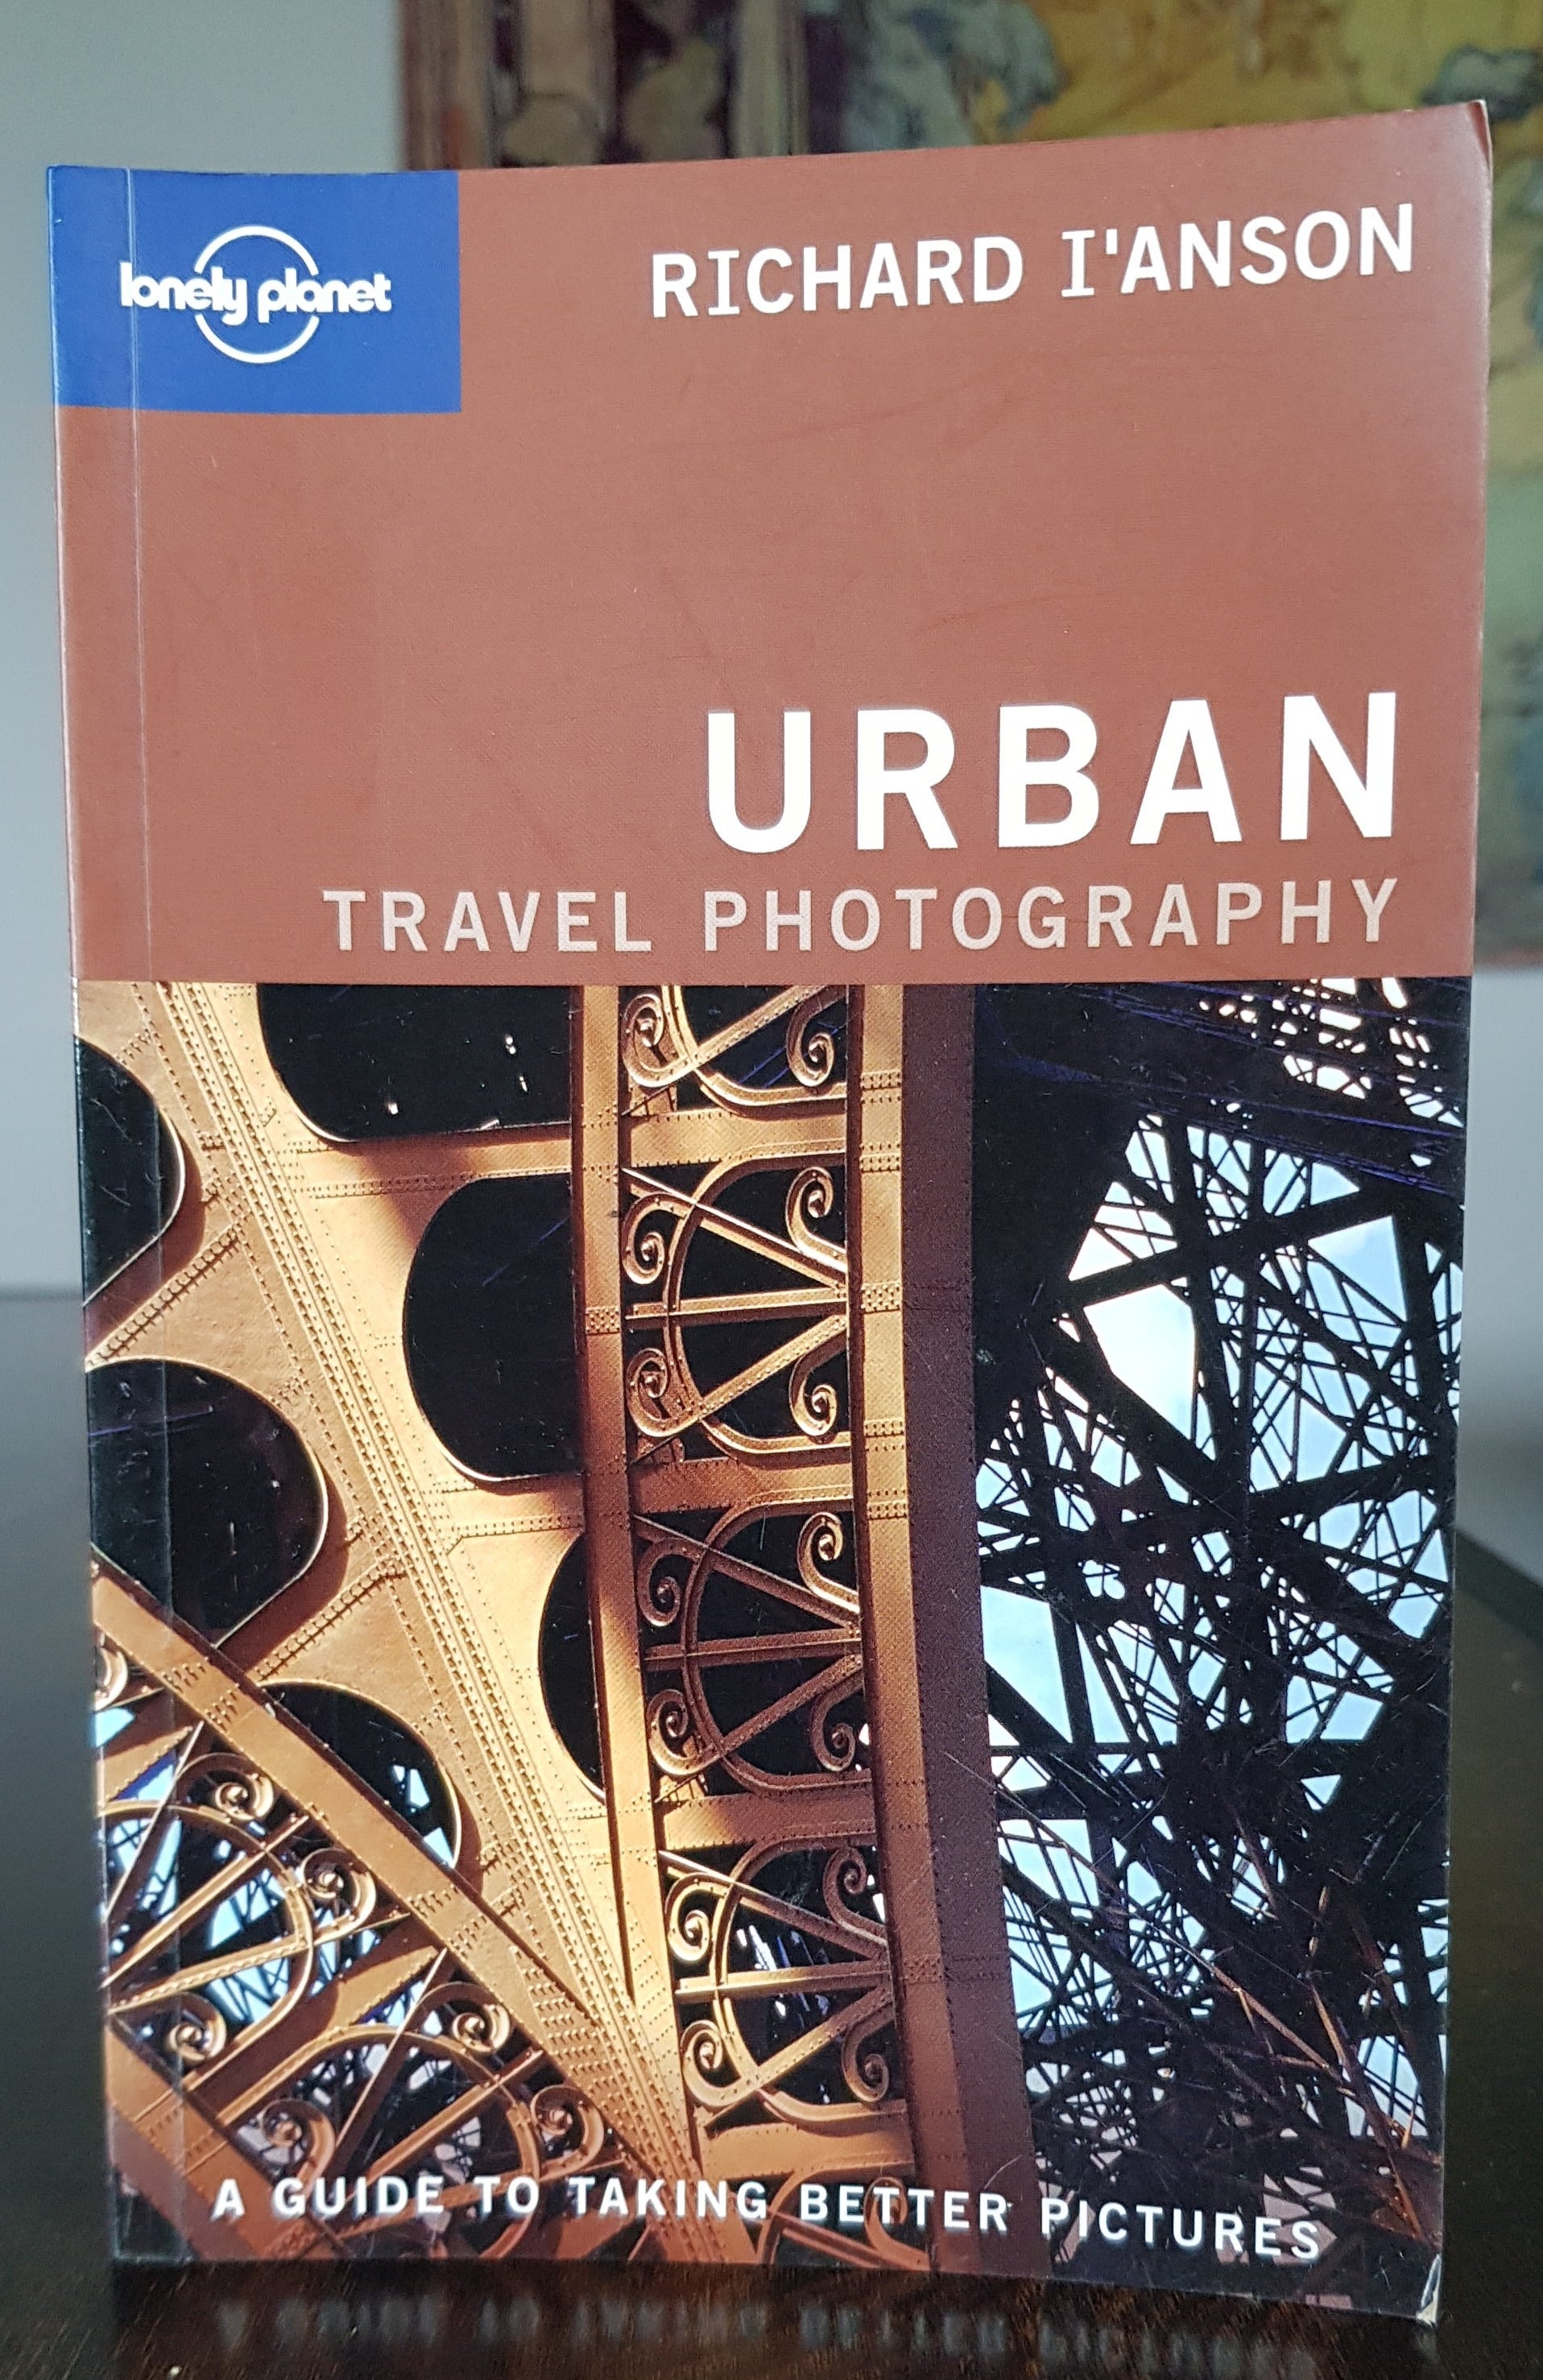 Urban　Lonely　I'Anson　by　Planet　Photography　Richard　(How　Books　to)　–　Green　House